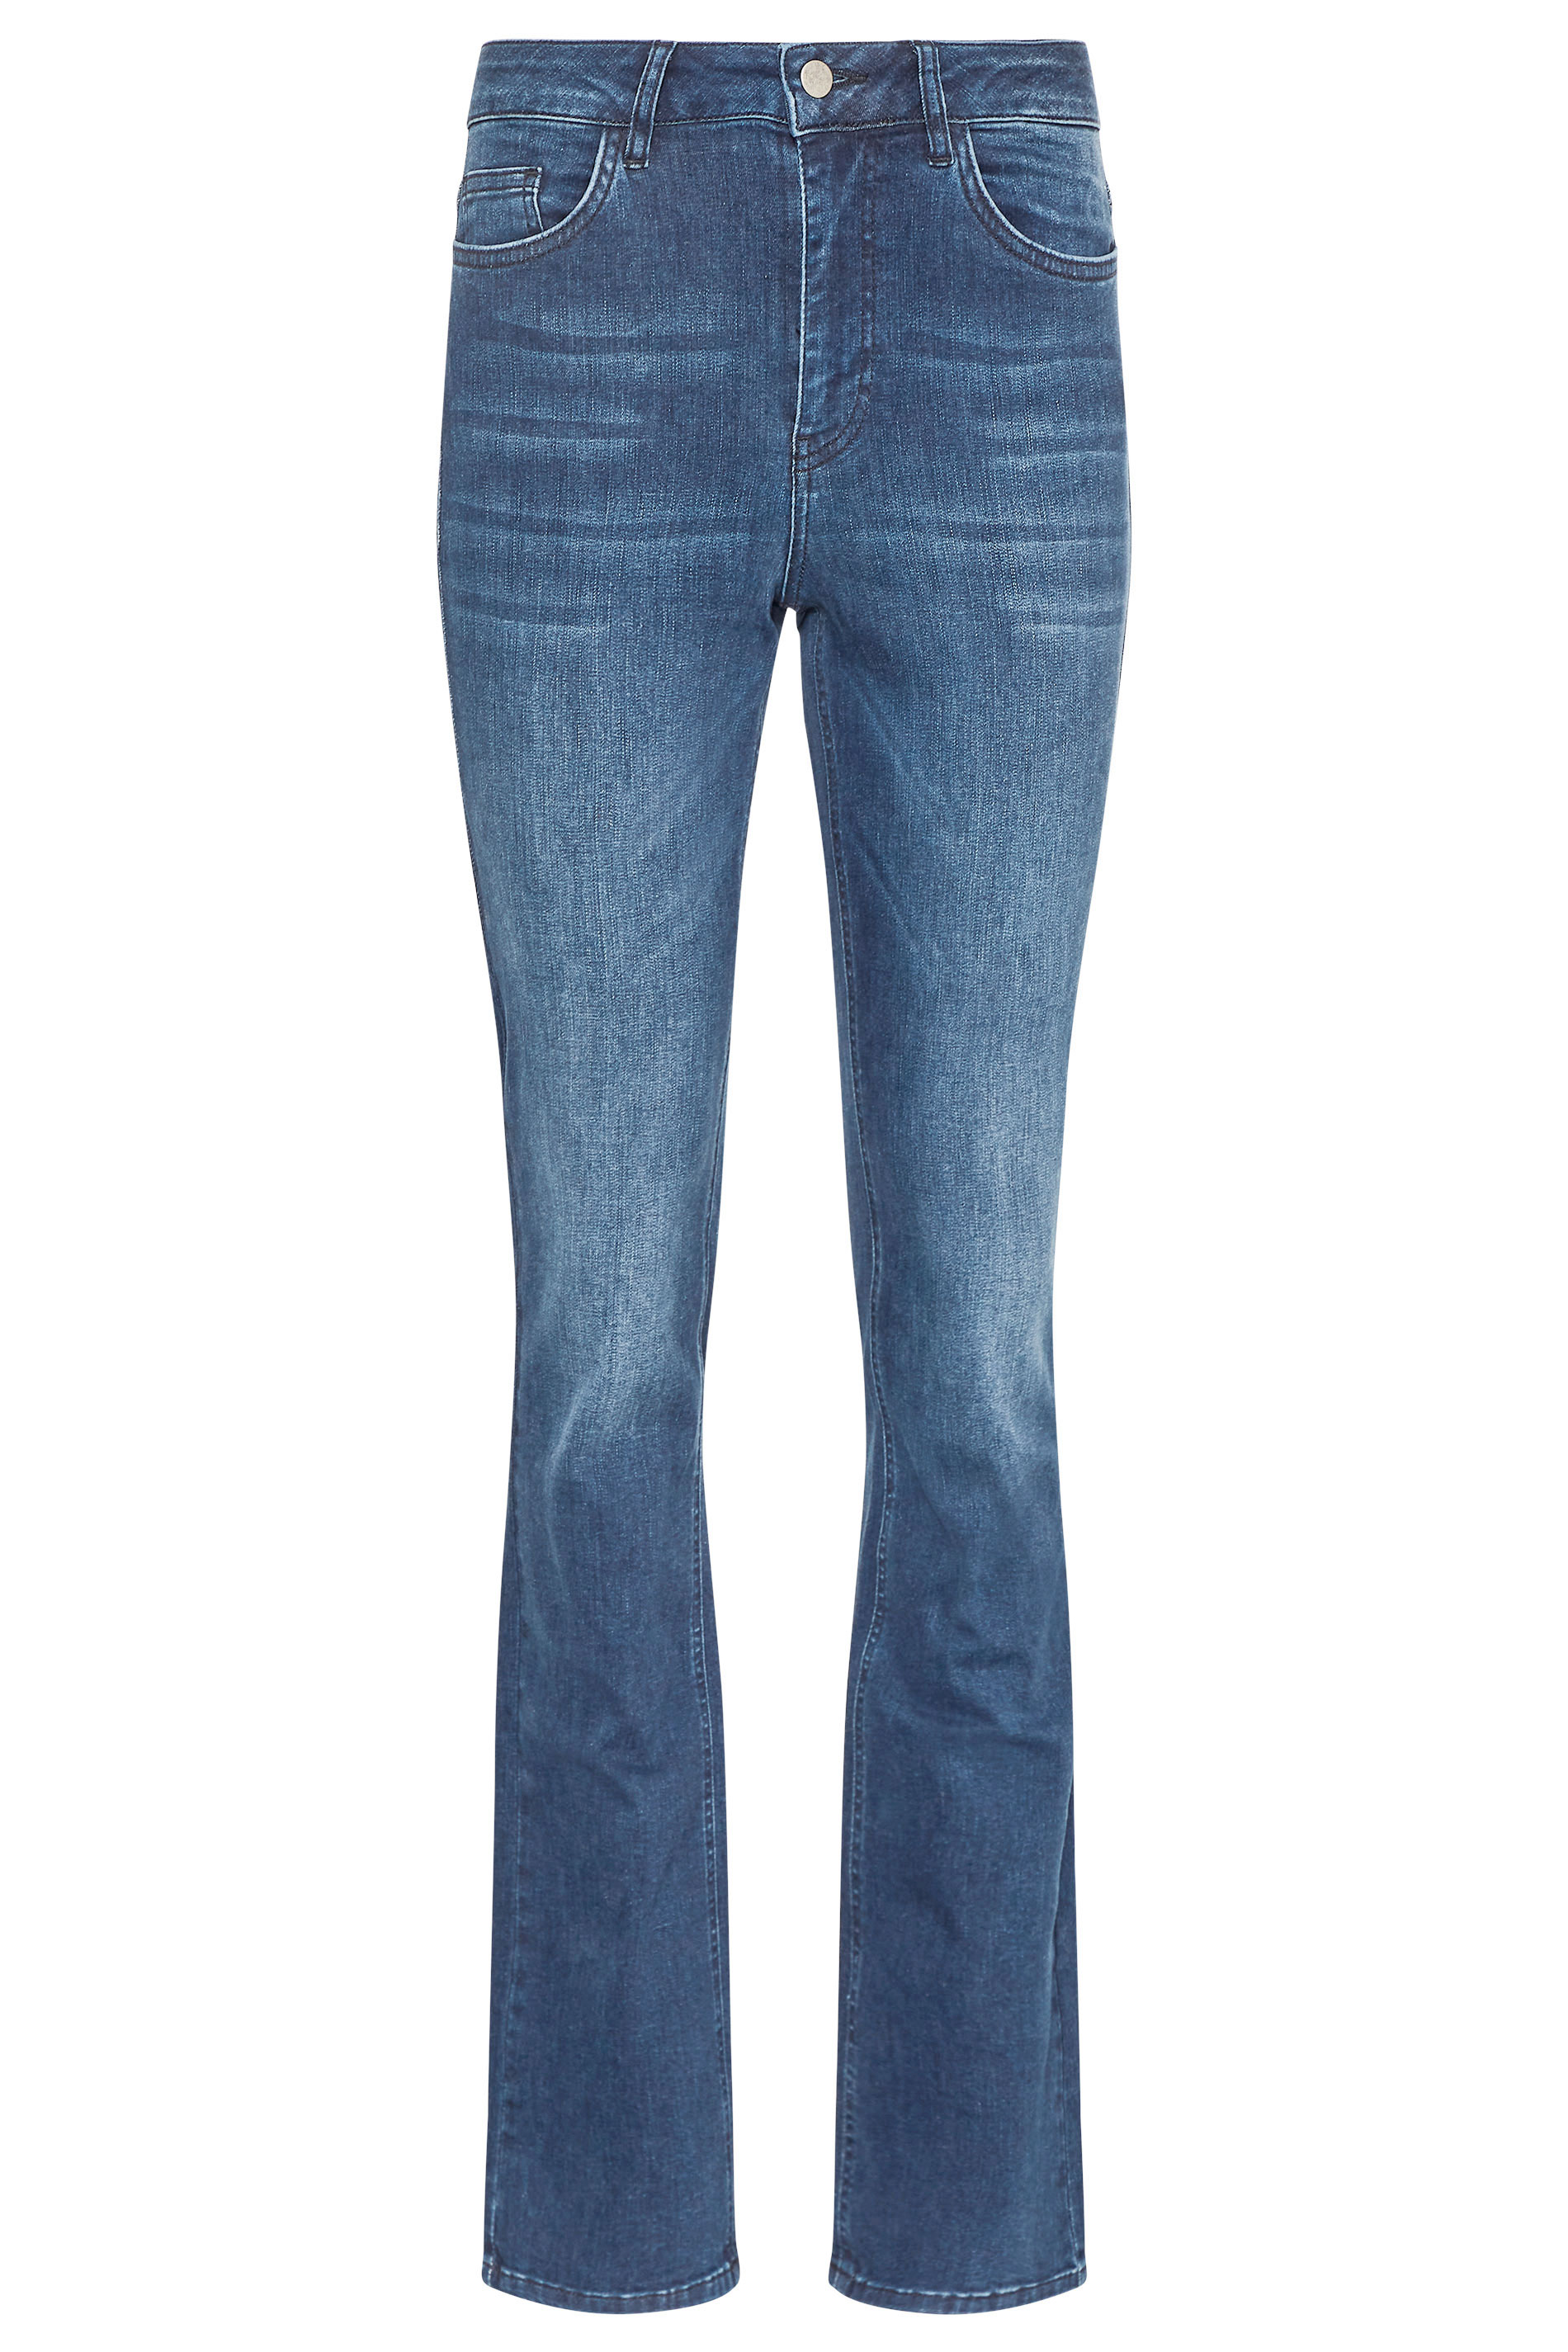 LTS MADE FOR GOOD Mid Blue Straight Leg Denim Jeans | Long Tall Sally